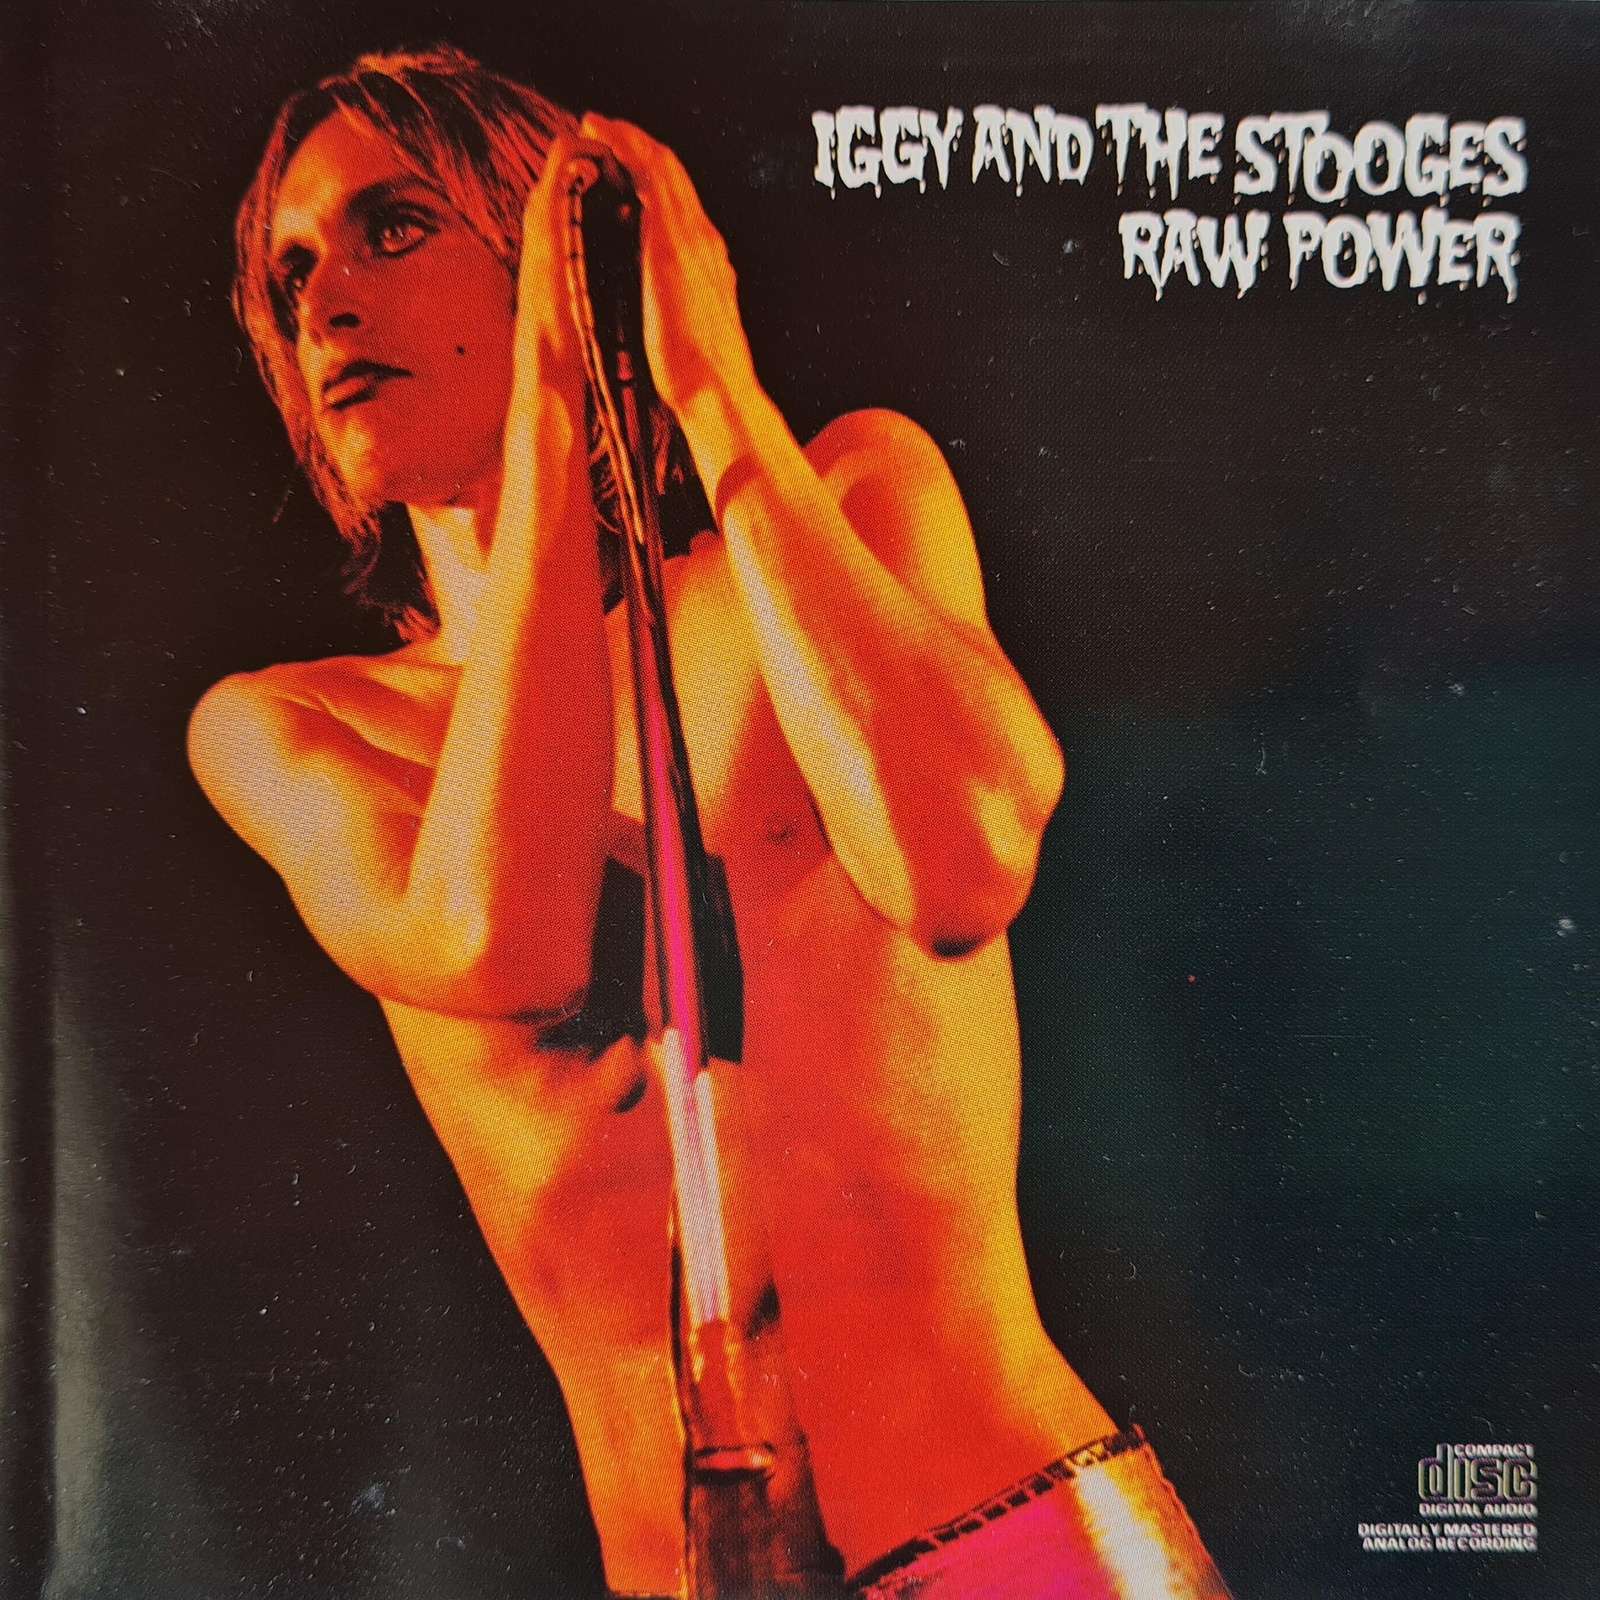 Iggy and the Stooges - Raw Power (CD)